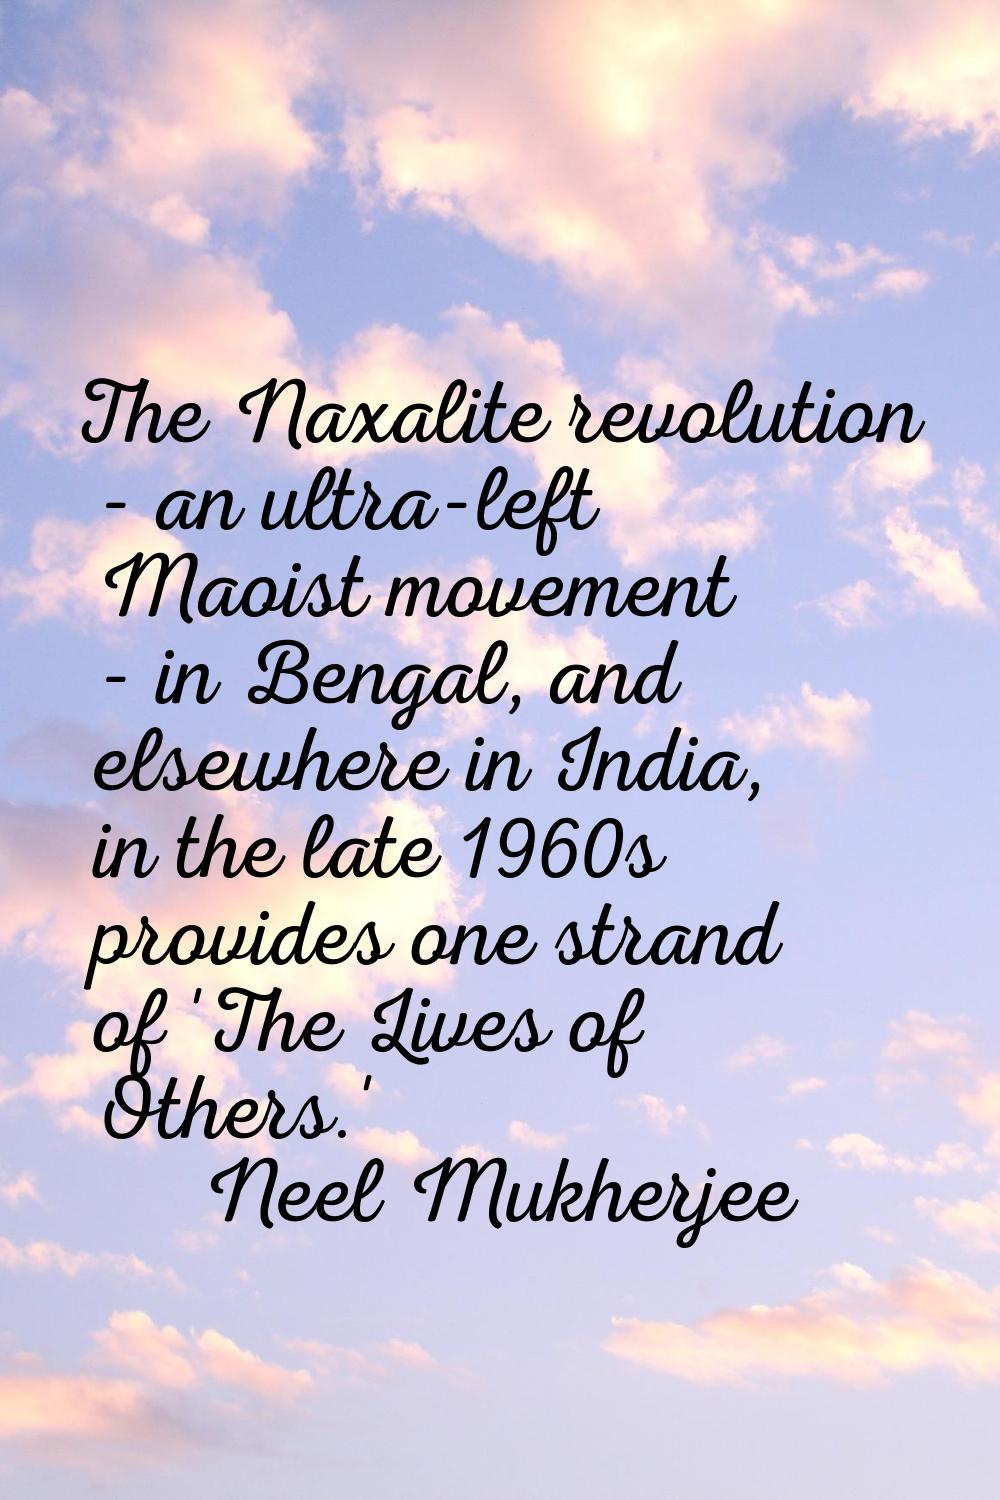 The Naxalite revolution - an ultra-left Maoist movement - in Bengal, and elsewhere in India, in the